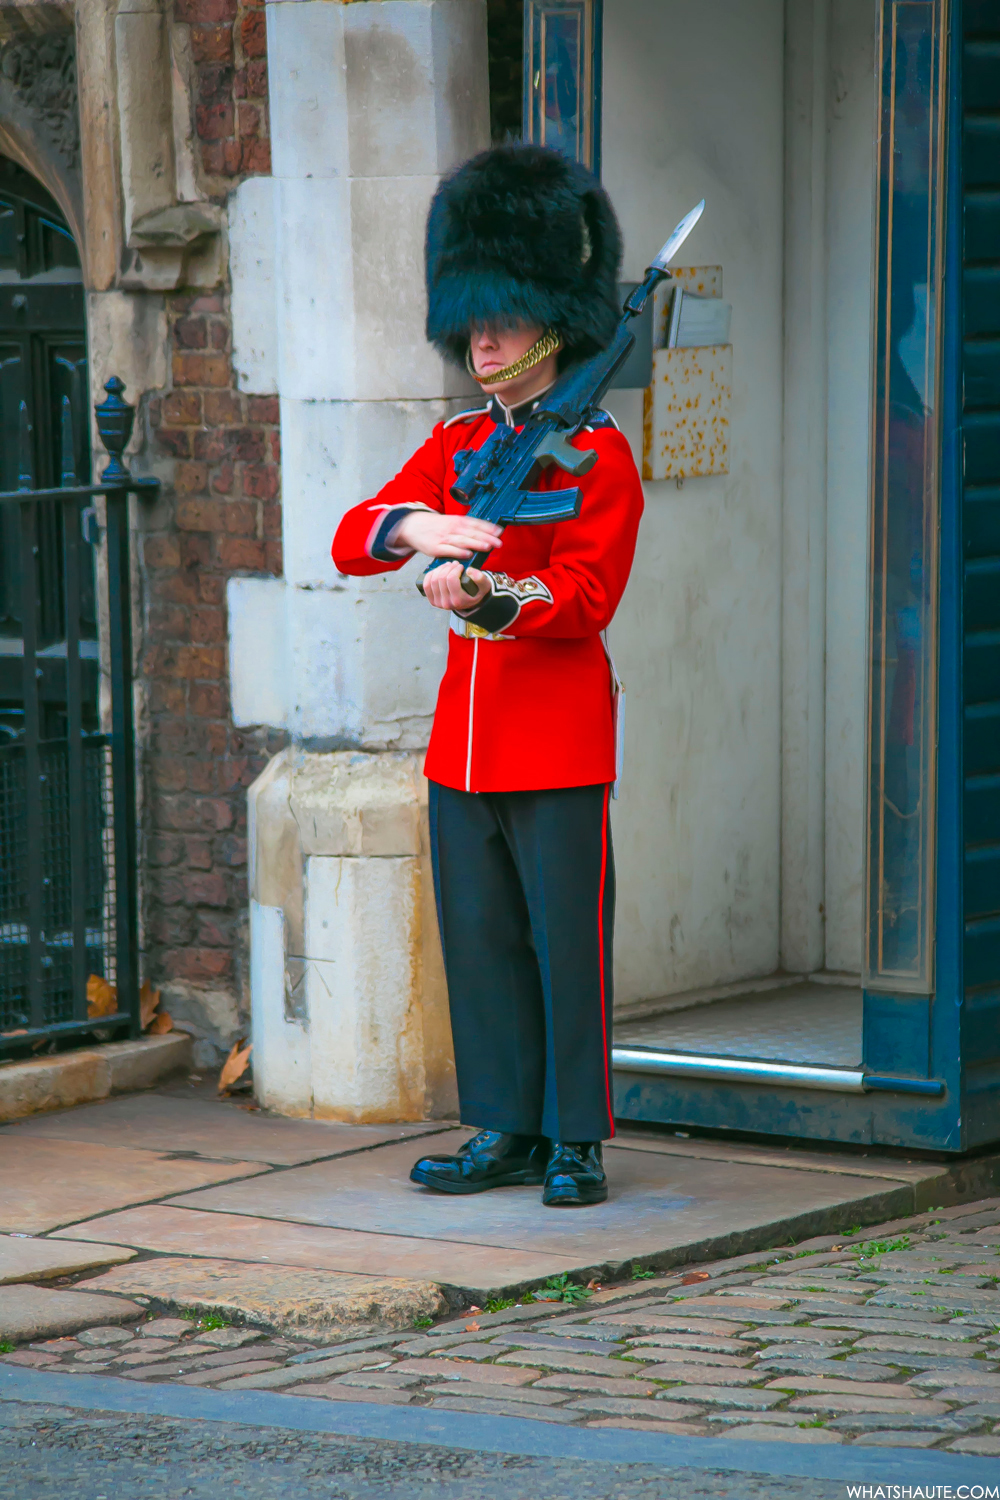 Royal Guard on Cleveland Row at St. James's Palace - London, England, What's Haute in the World